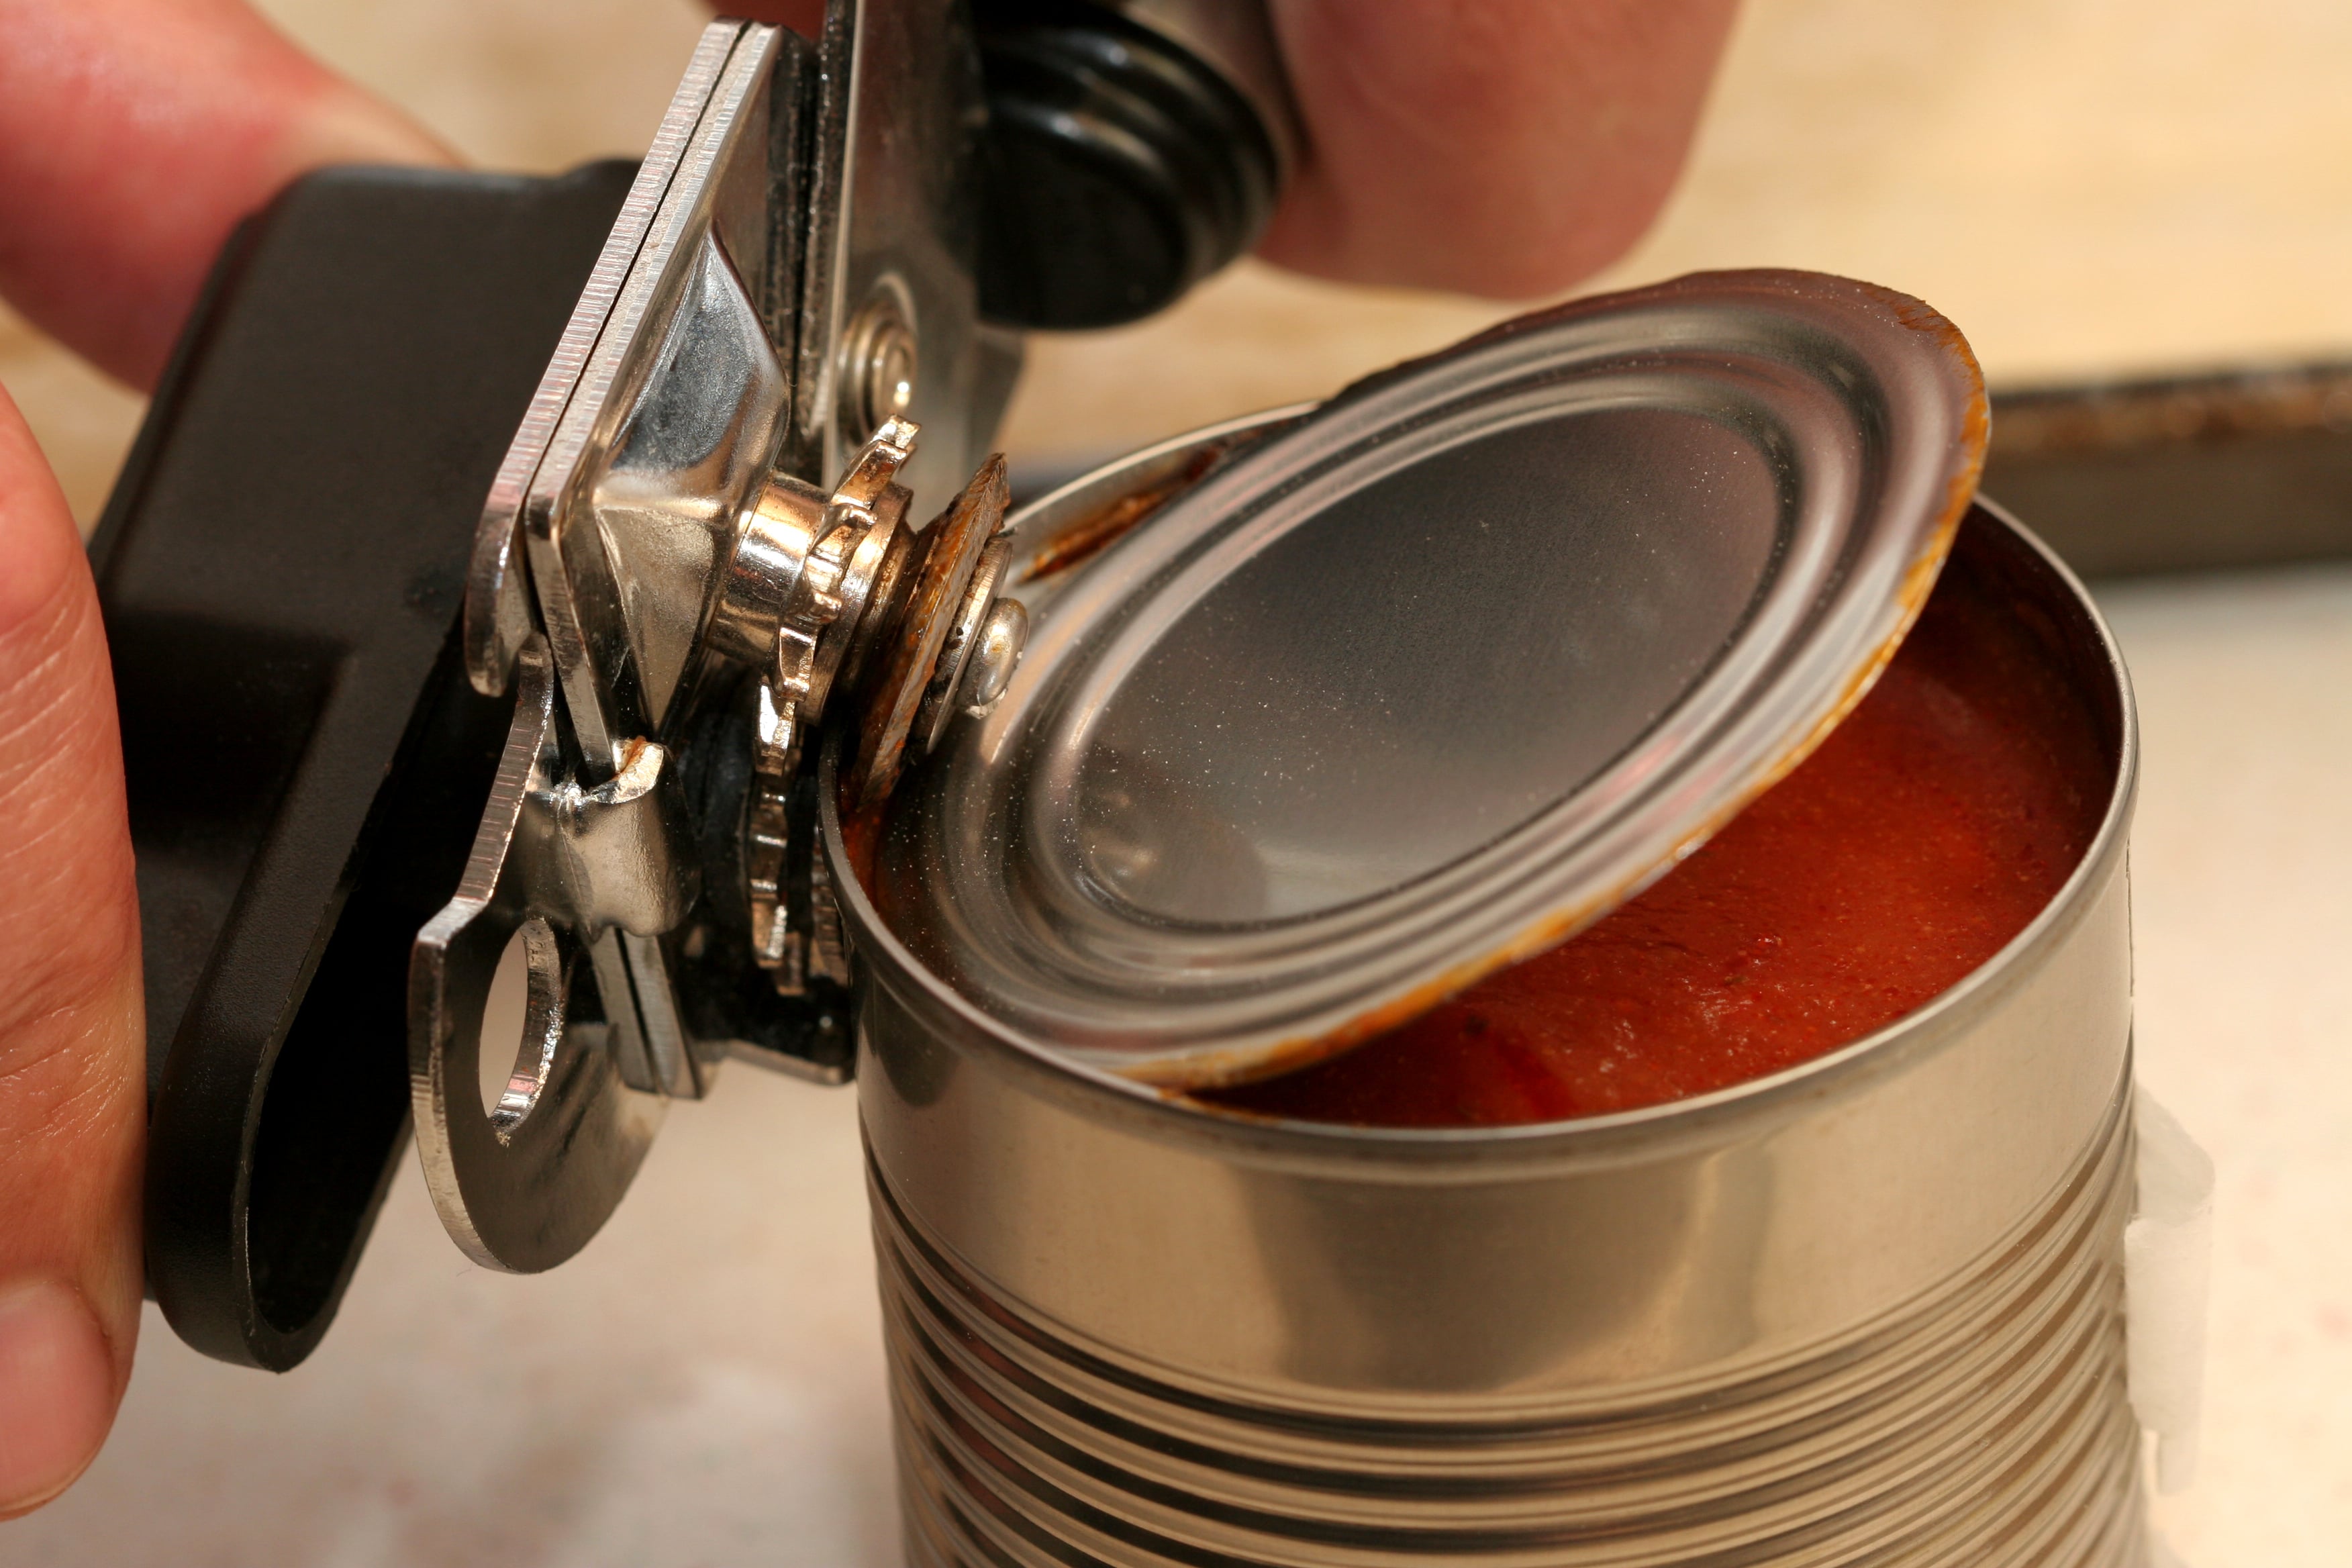 My search for a left-handed can opener - MyFixitUpLife